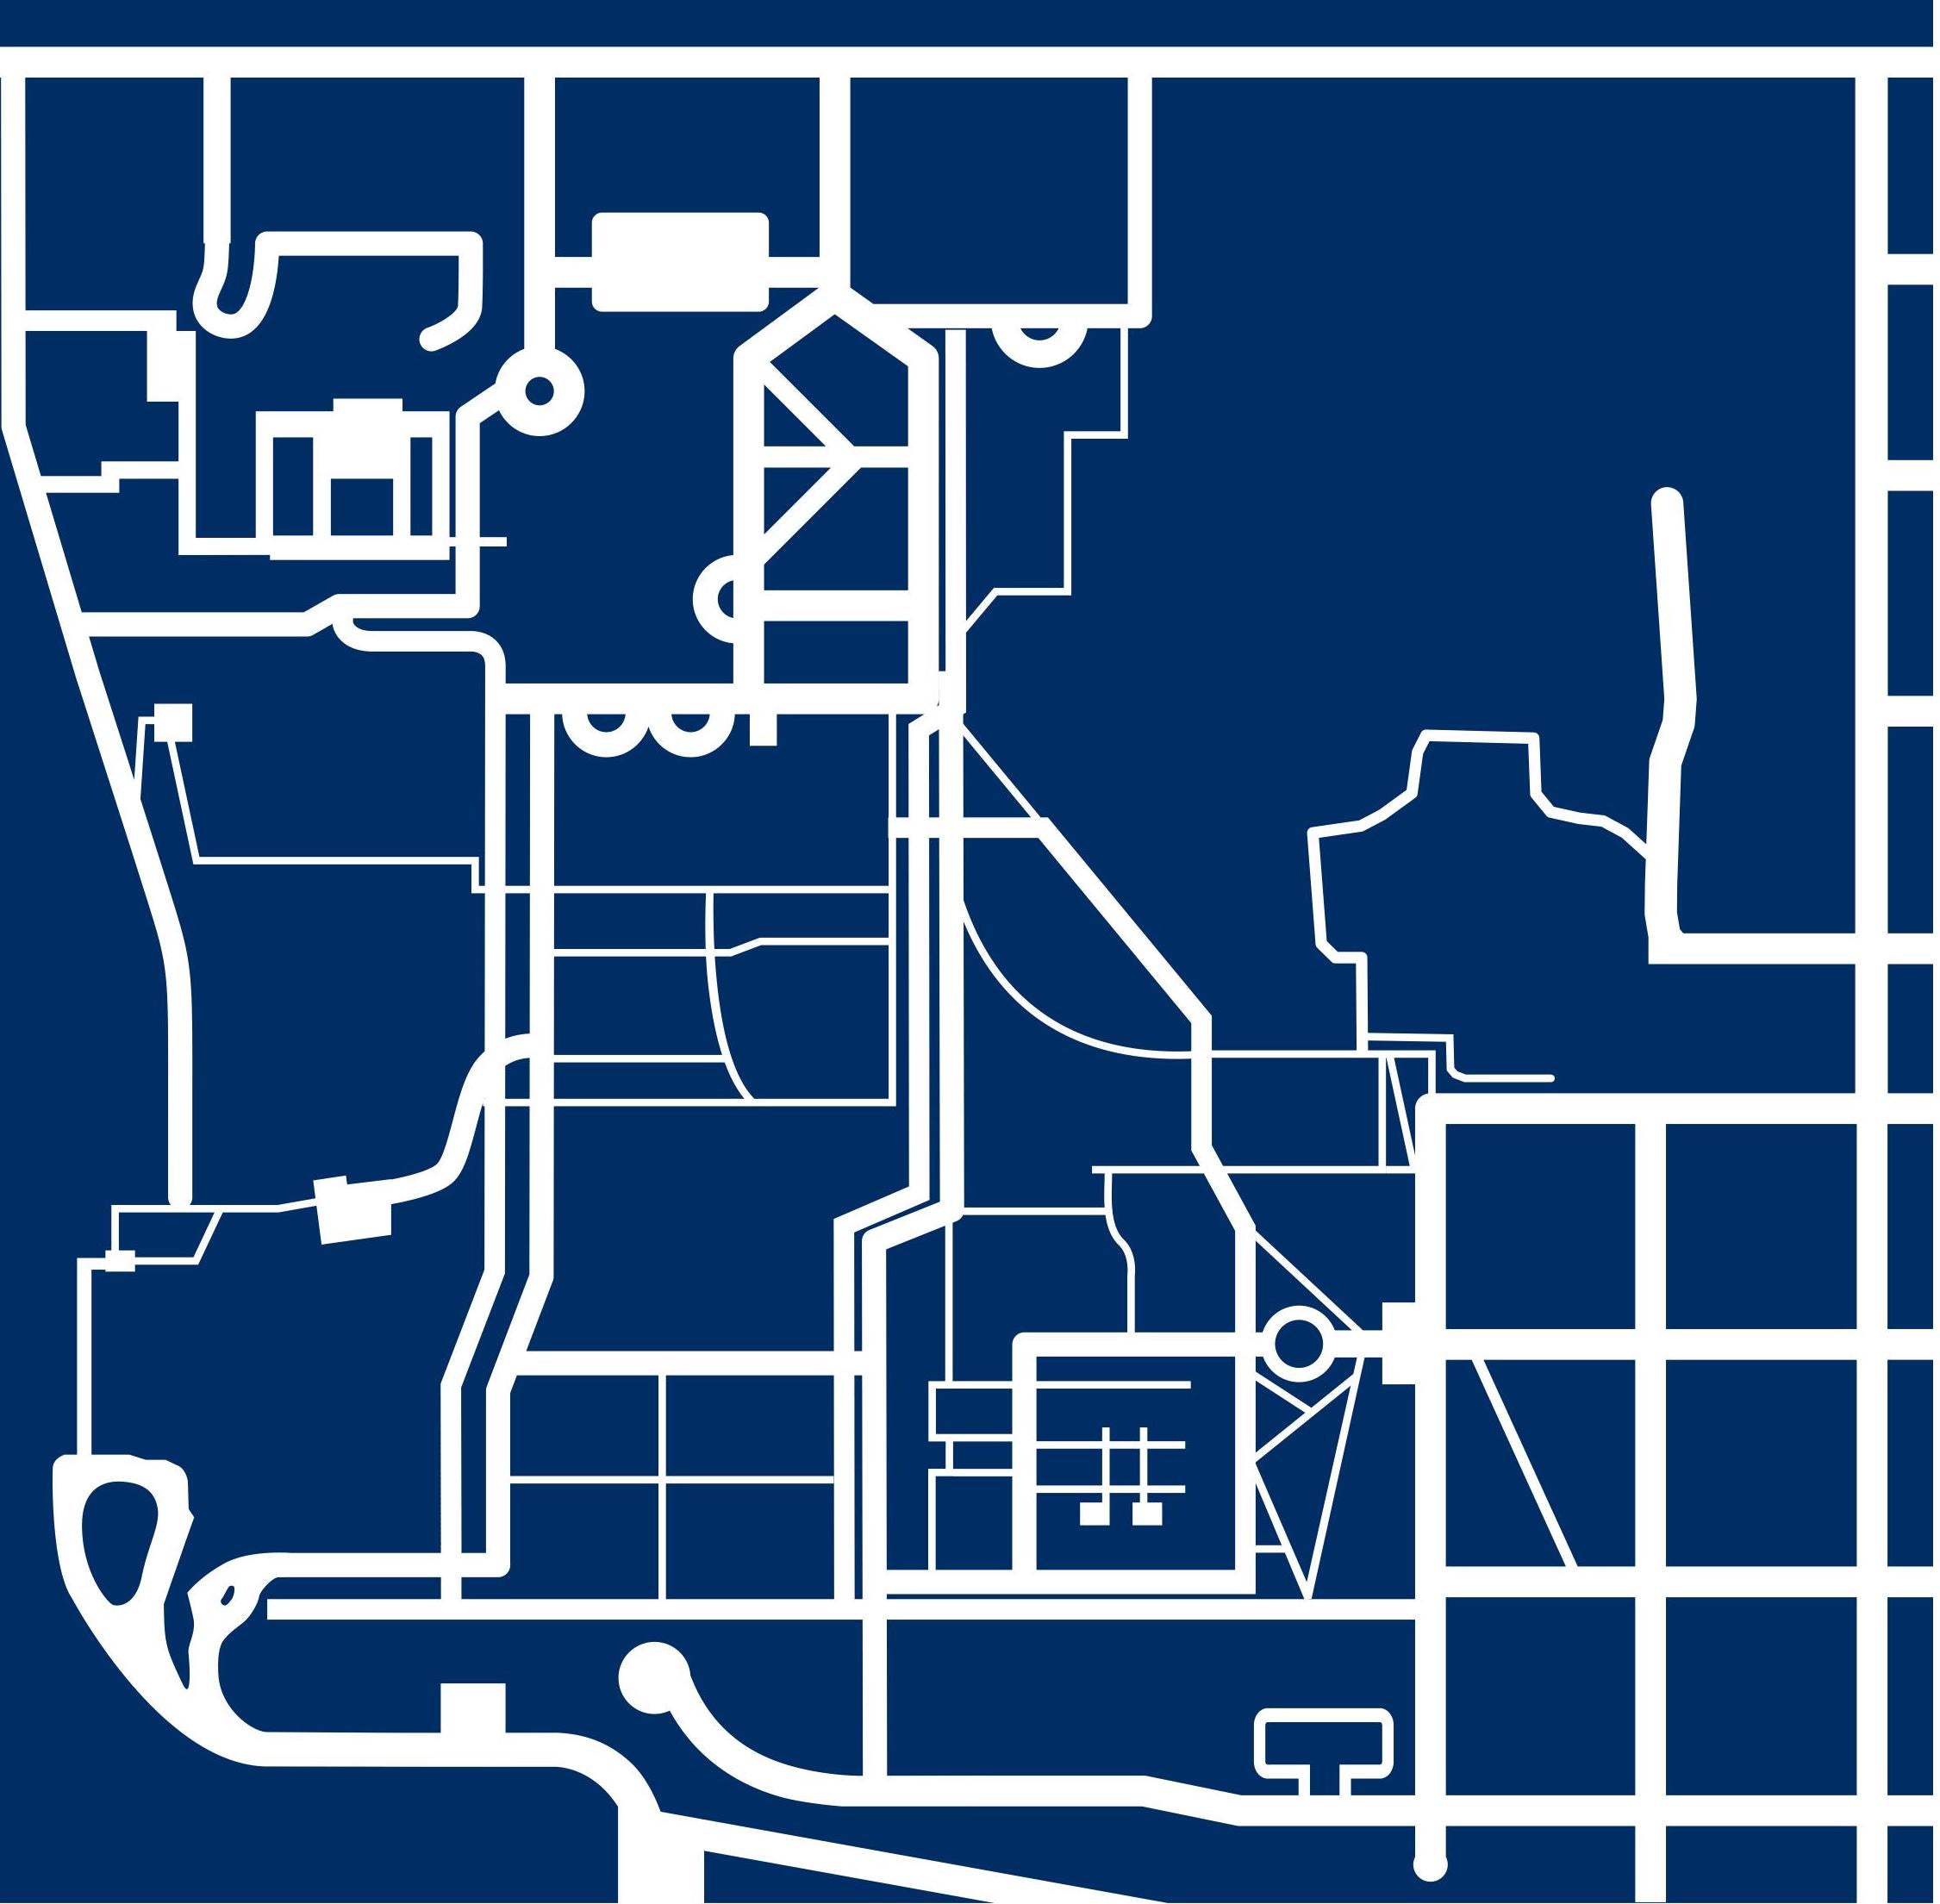 Dark blue and white graphic of the Georgetown campus map